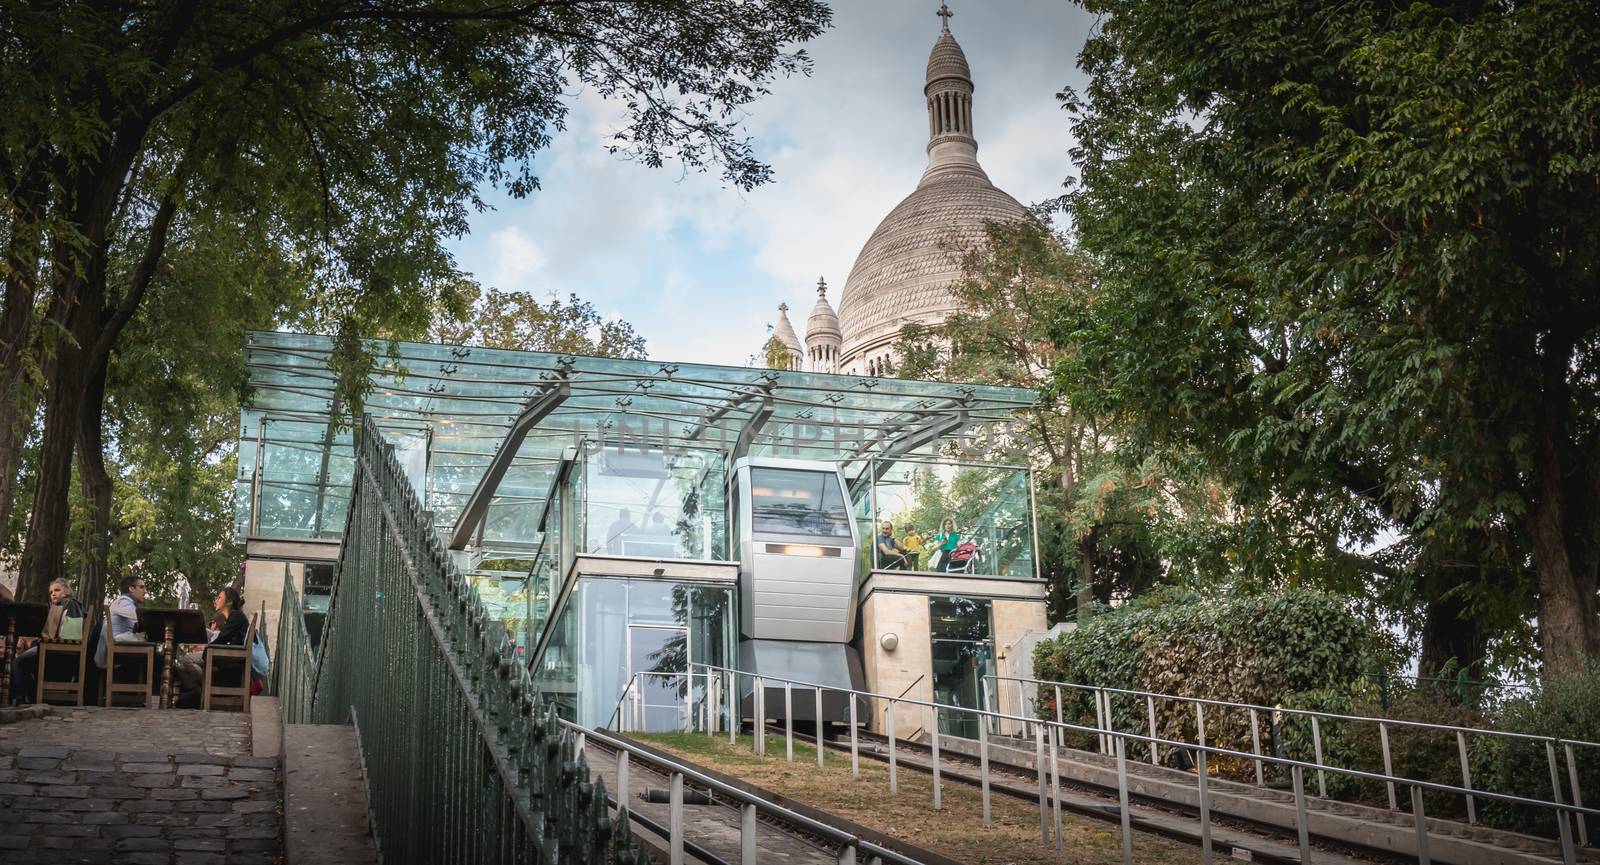 Paris, France - October 6, 2018: view of the funicular of Montmartre which allows to climb to the top of the hill Montmartre and to access the basilica of the Sacred Heart